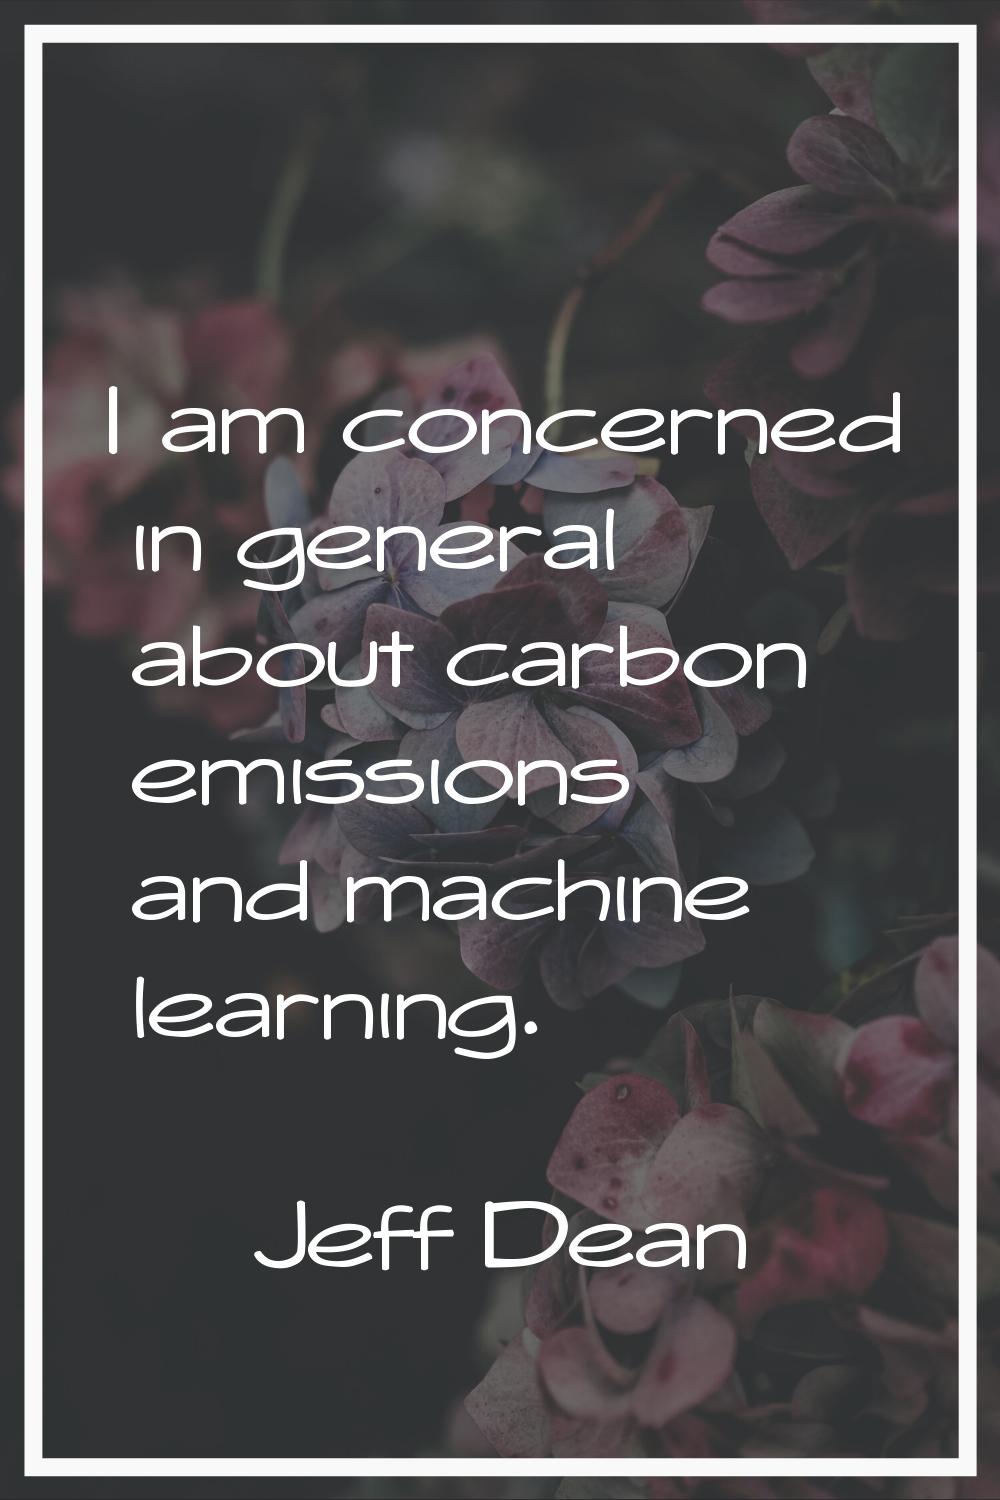 I am concerned in general about carbon emissions and machine learning.